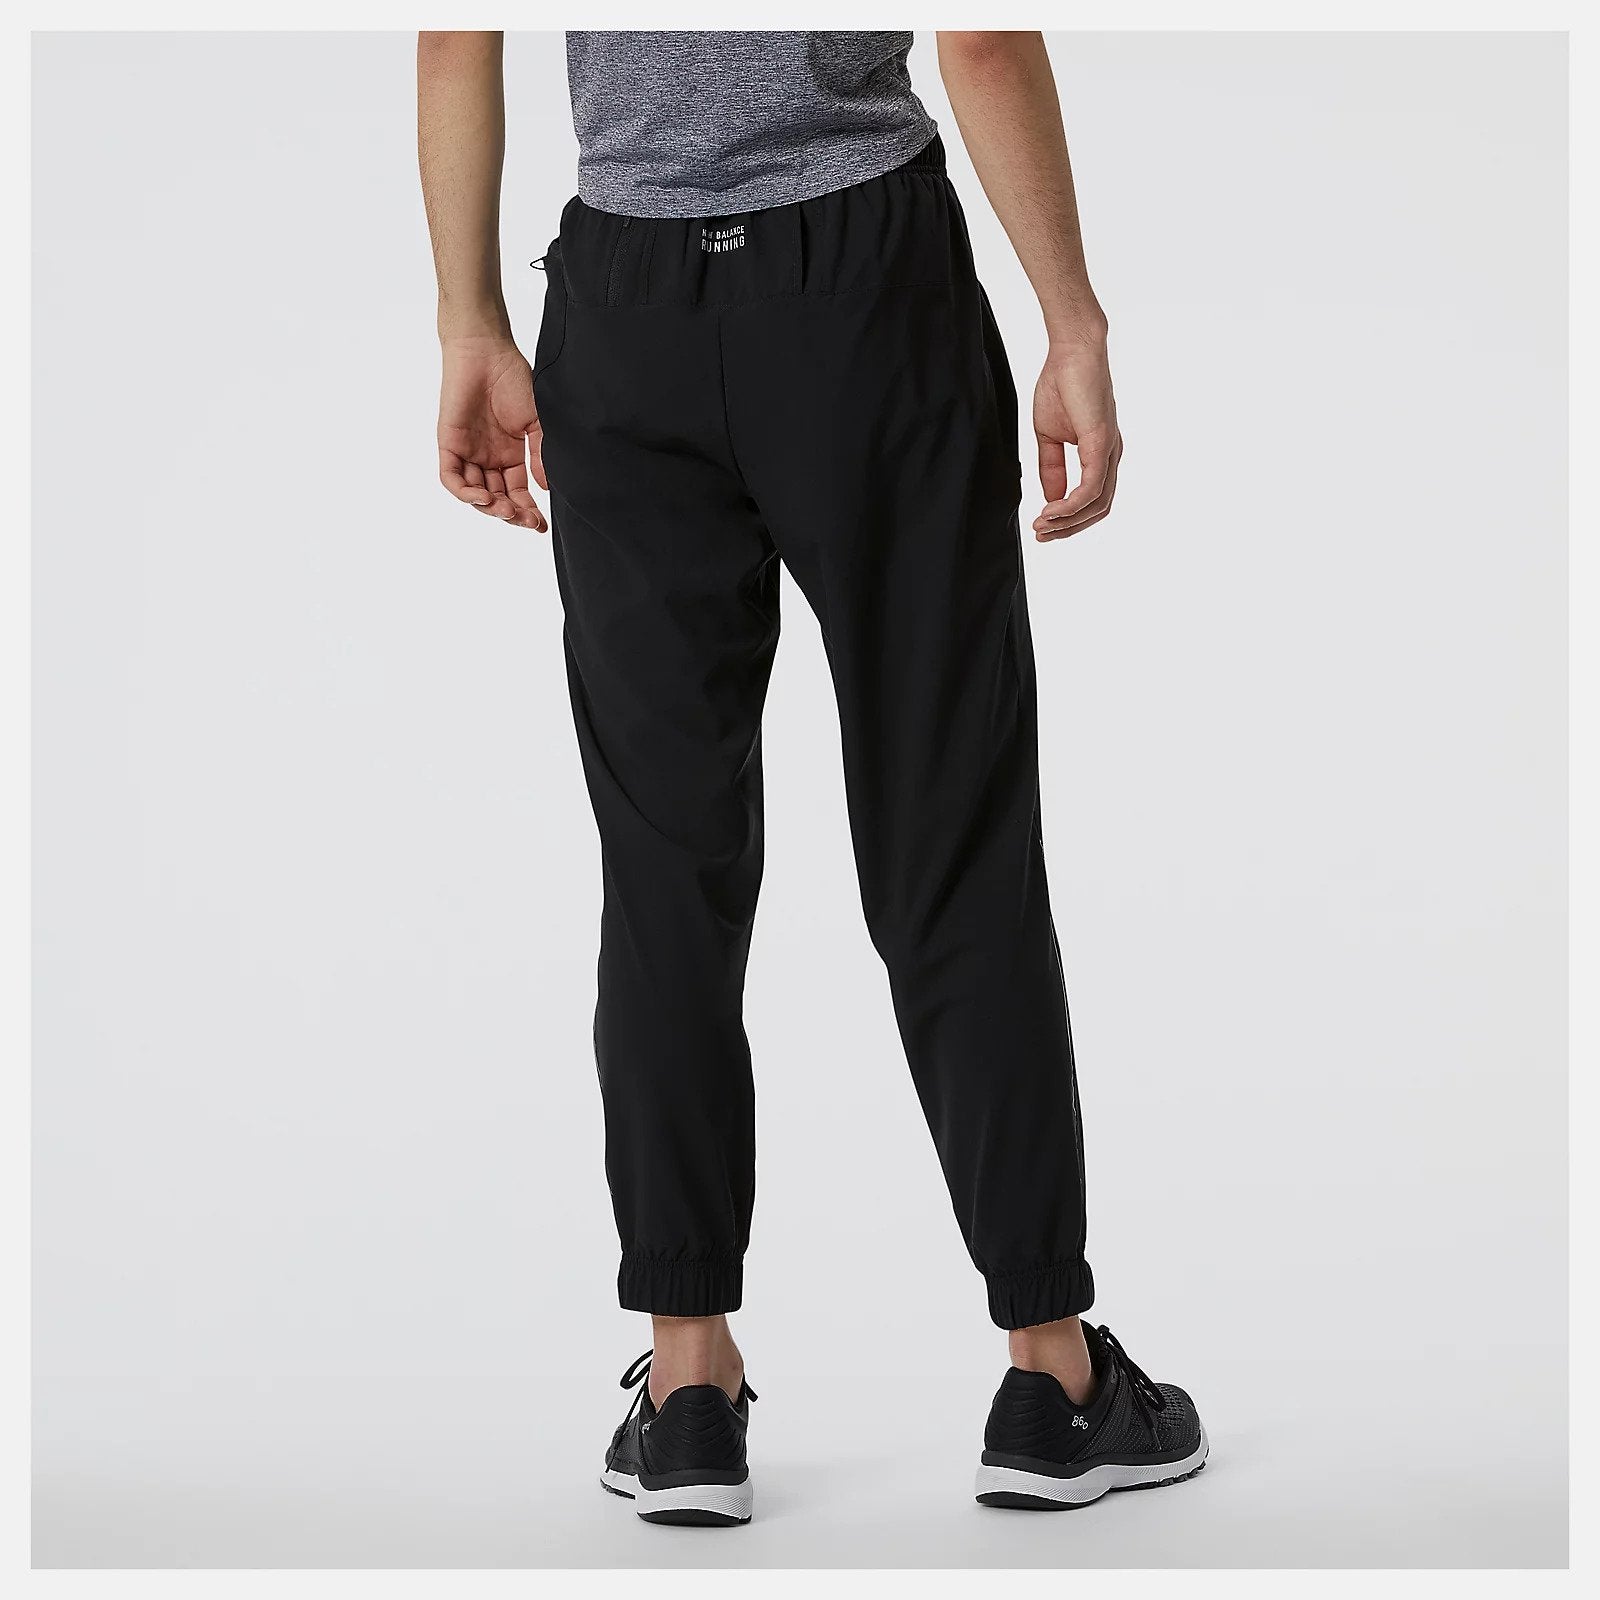 Back view of the Men's Impact Run Woven Pant by New Balance in Black